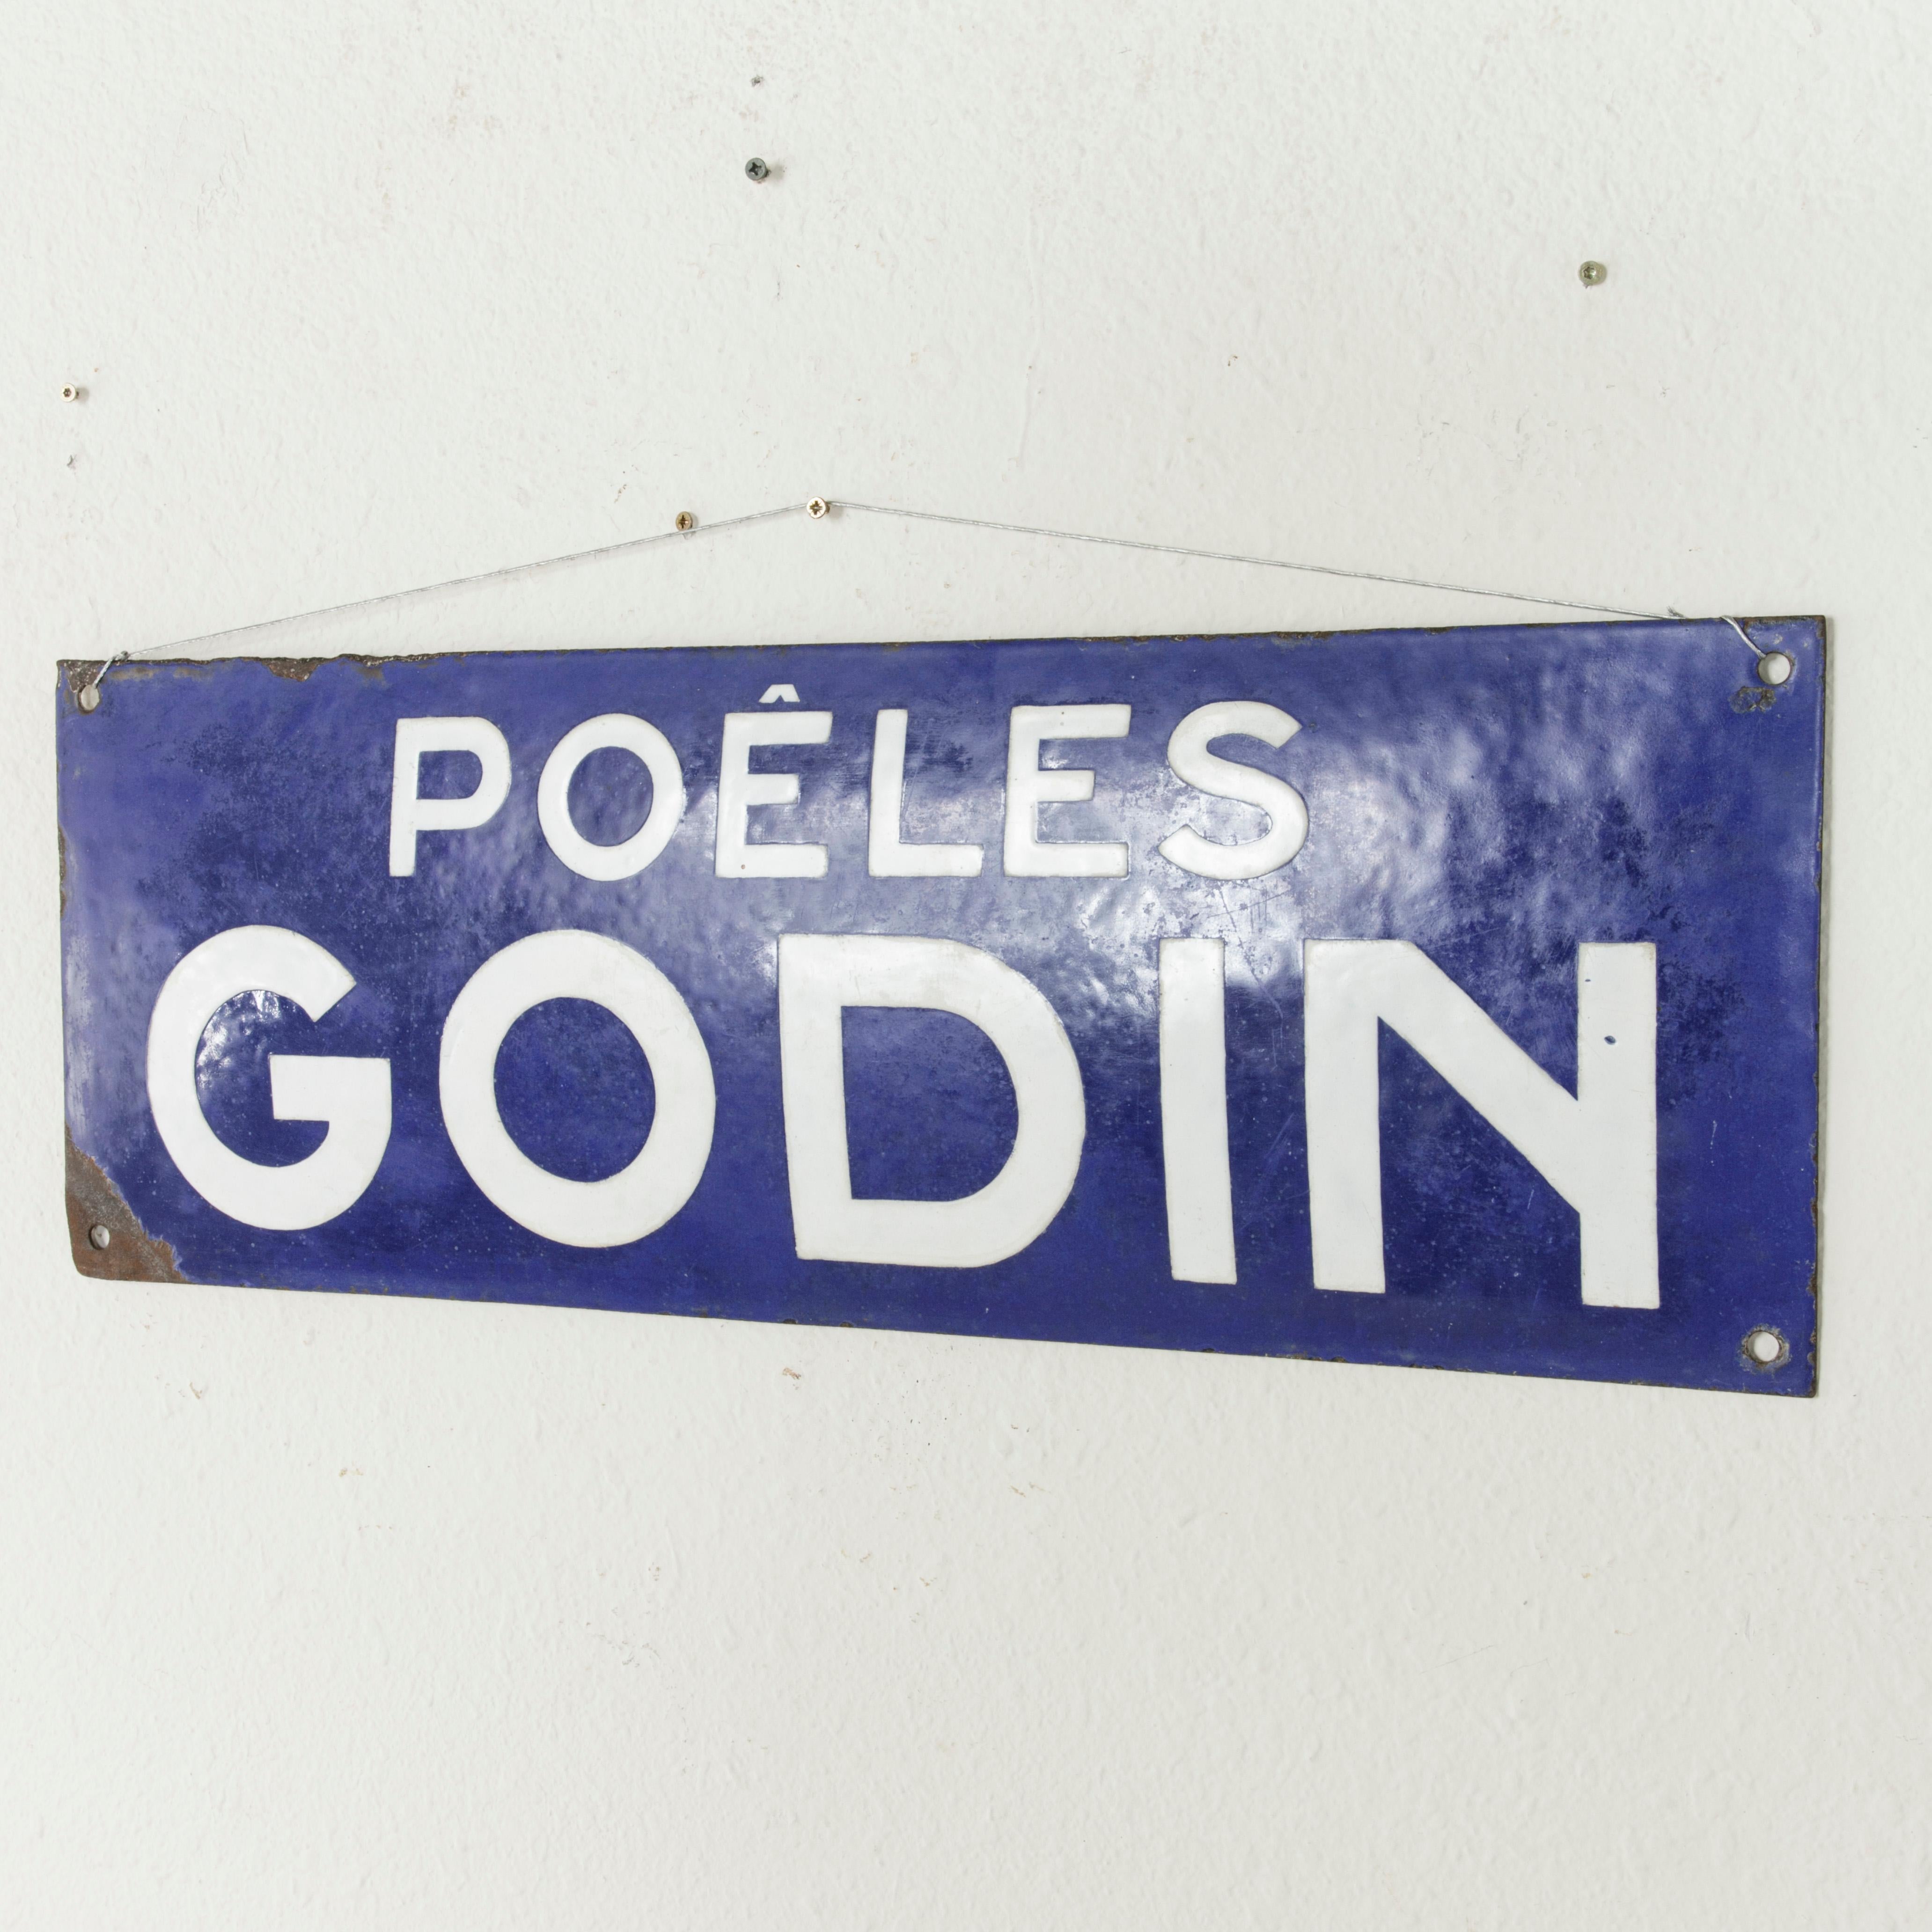 This late 19th century French blue and white enameled bombe sign or plaque features the name Poeles Godin advertising Godin Stoves. The manufacturing of Godin stoves began in 1840 by the French industrialist Jean-Baptiste Andre Godin (1817-1888),